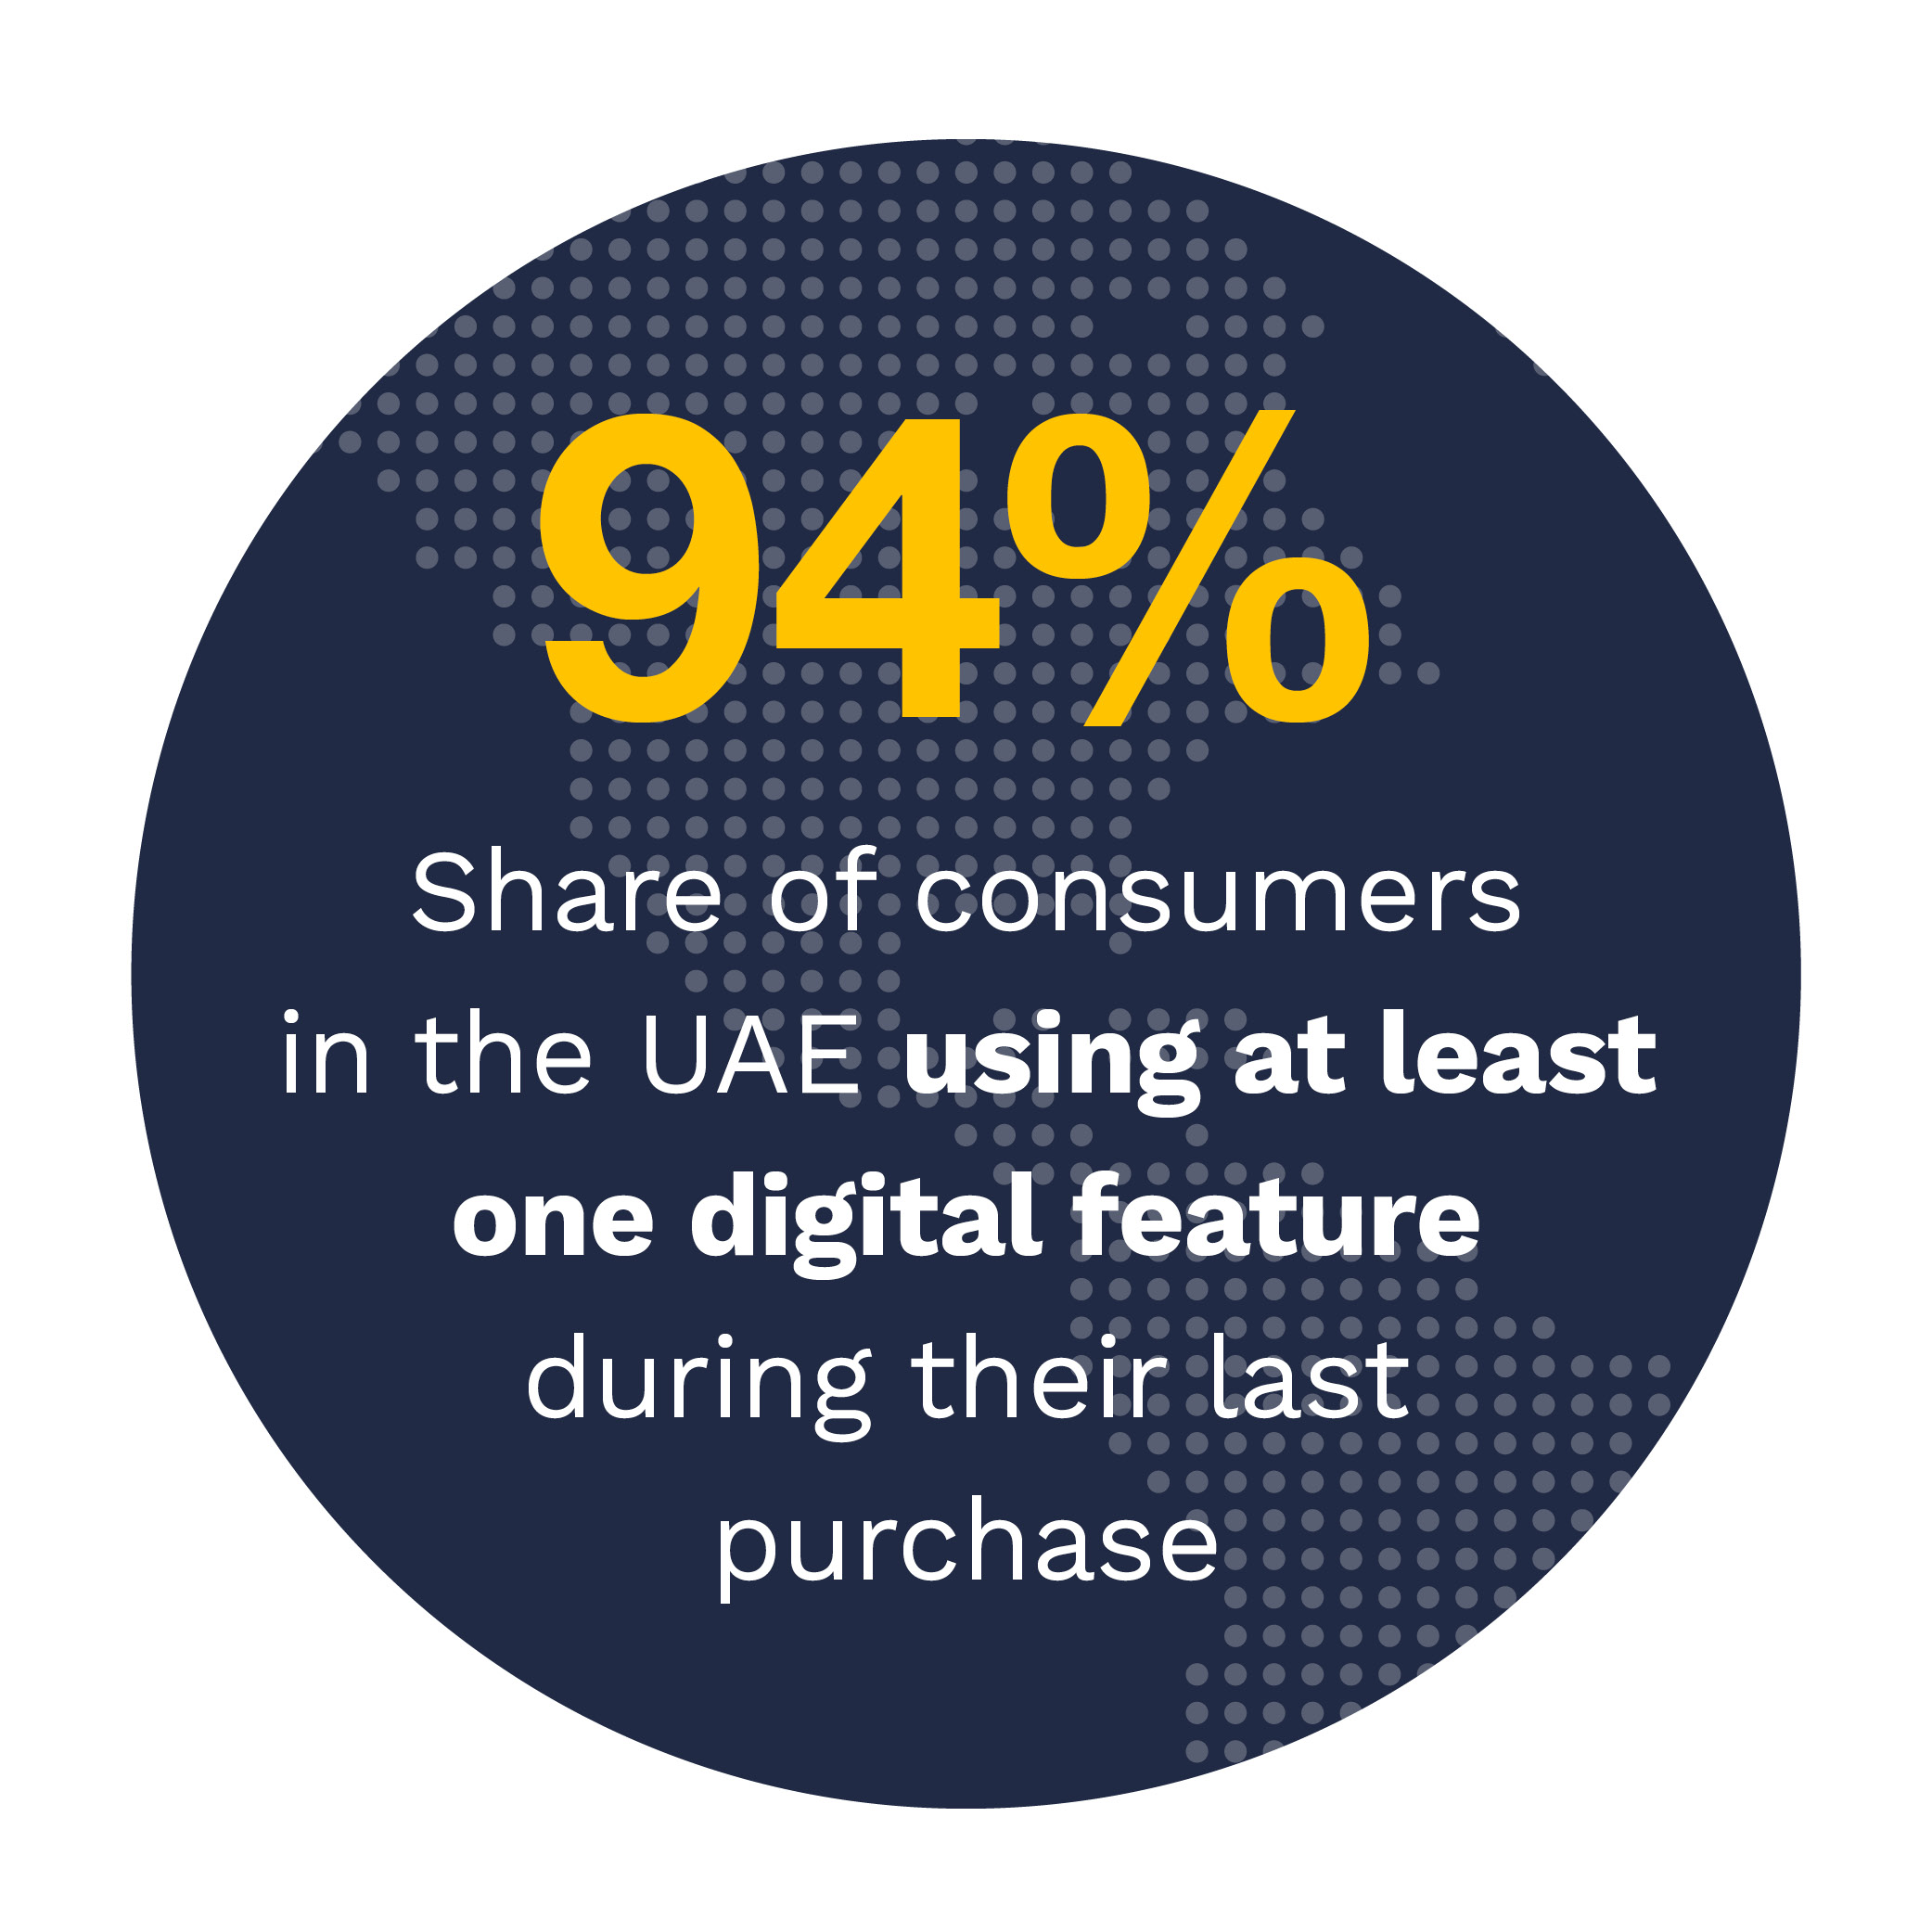 94%: Share of consumers in the UAE using at least one digital feature during their last purchase